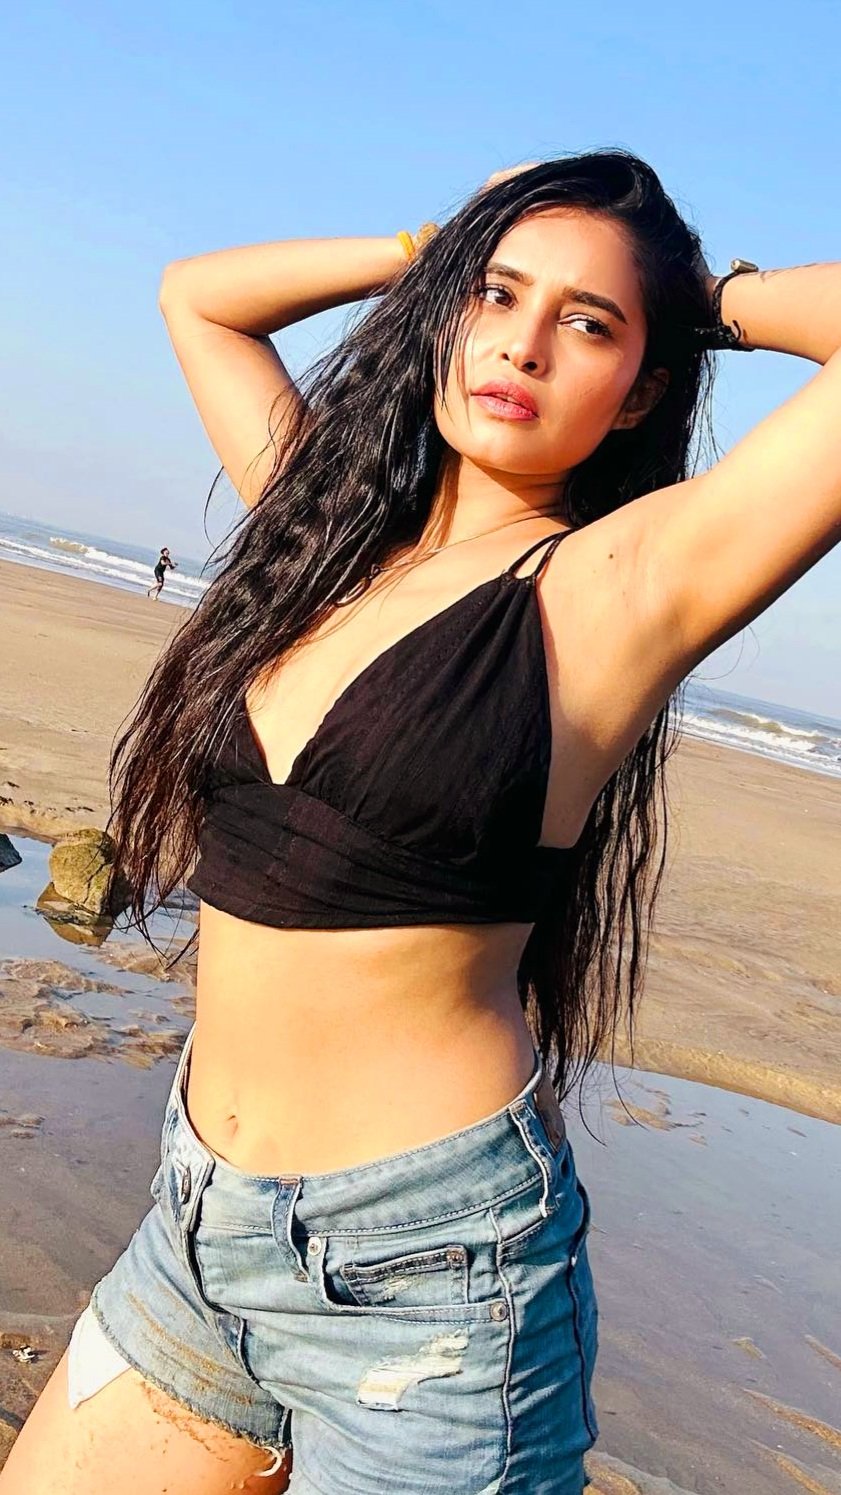 Armpit Navel Thighs KING👑 on X: Gym Morning & Aunties Nice would love to  see your fitness journey #Cameltoe #Armpit wet B🍊🍊bs & sweat wet, #Milf  #Tolly star 😋💦🔥  / X